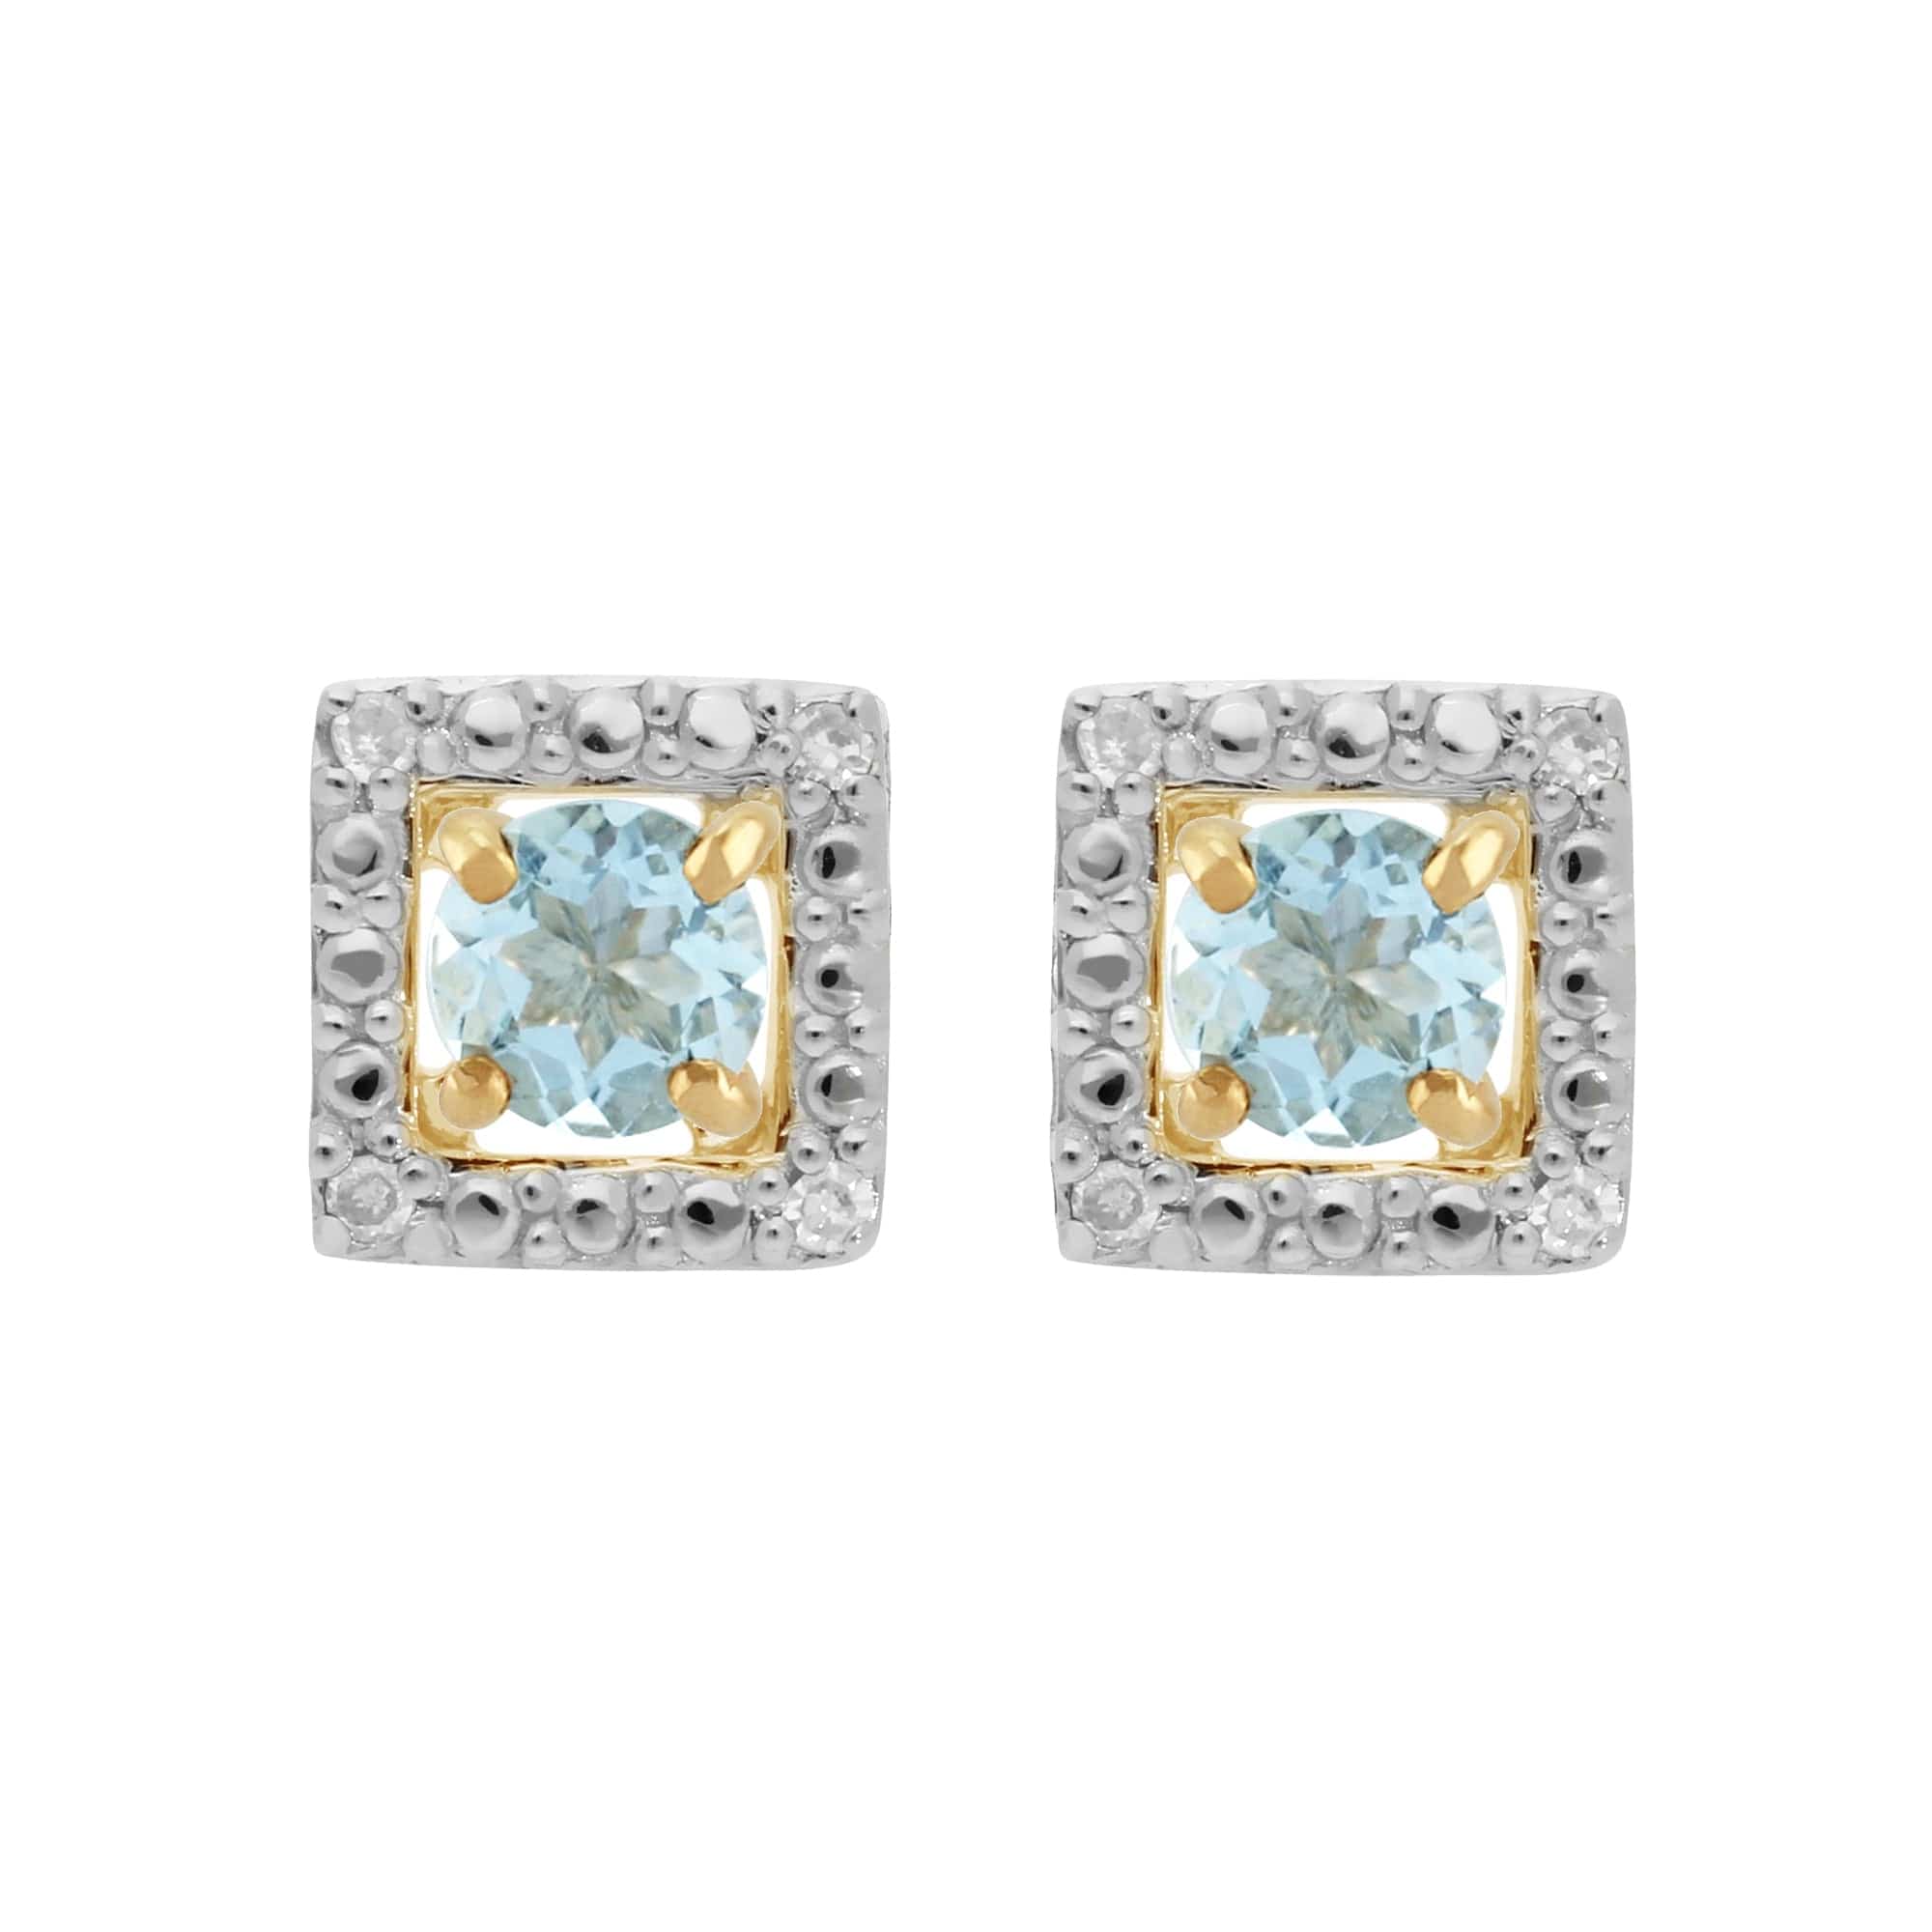 11567-191E0379019 Classic Round Aquamarine Stud Earrings with Detachable Diamond Square Earrings Jacket Set in 9ct Yellow Gold 1